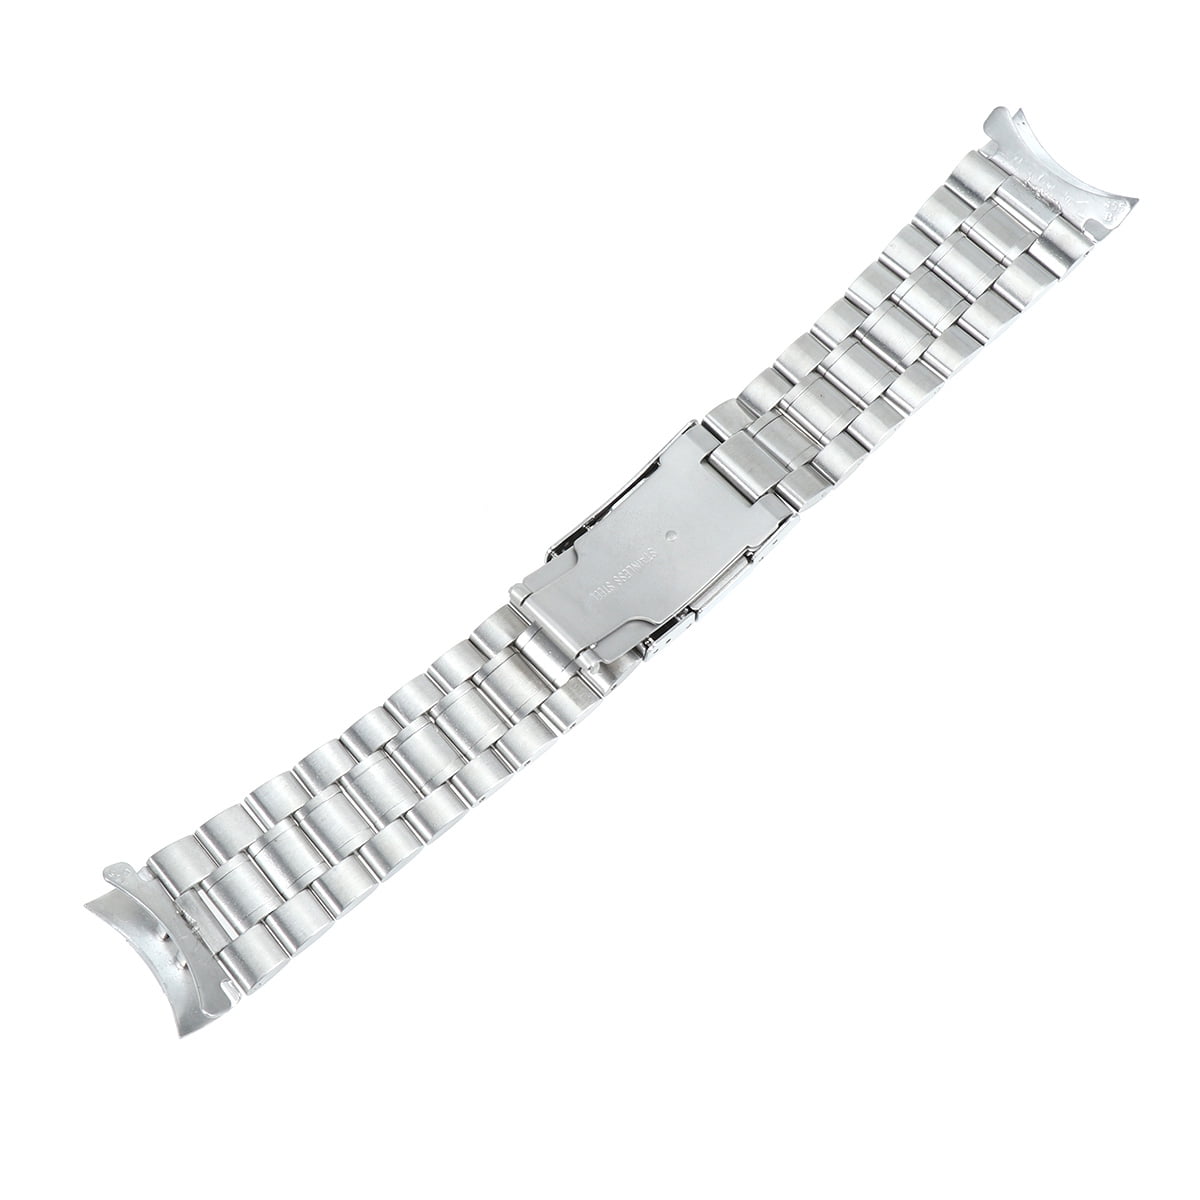 24mm Stainless Steel Bracelet Watch Band Strap Curved End Links ...